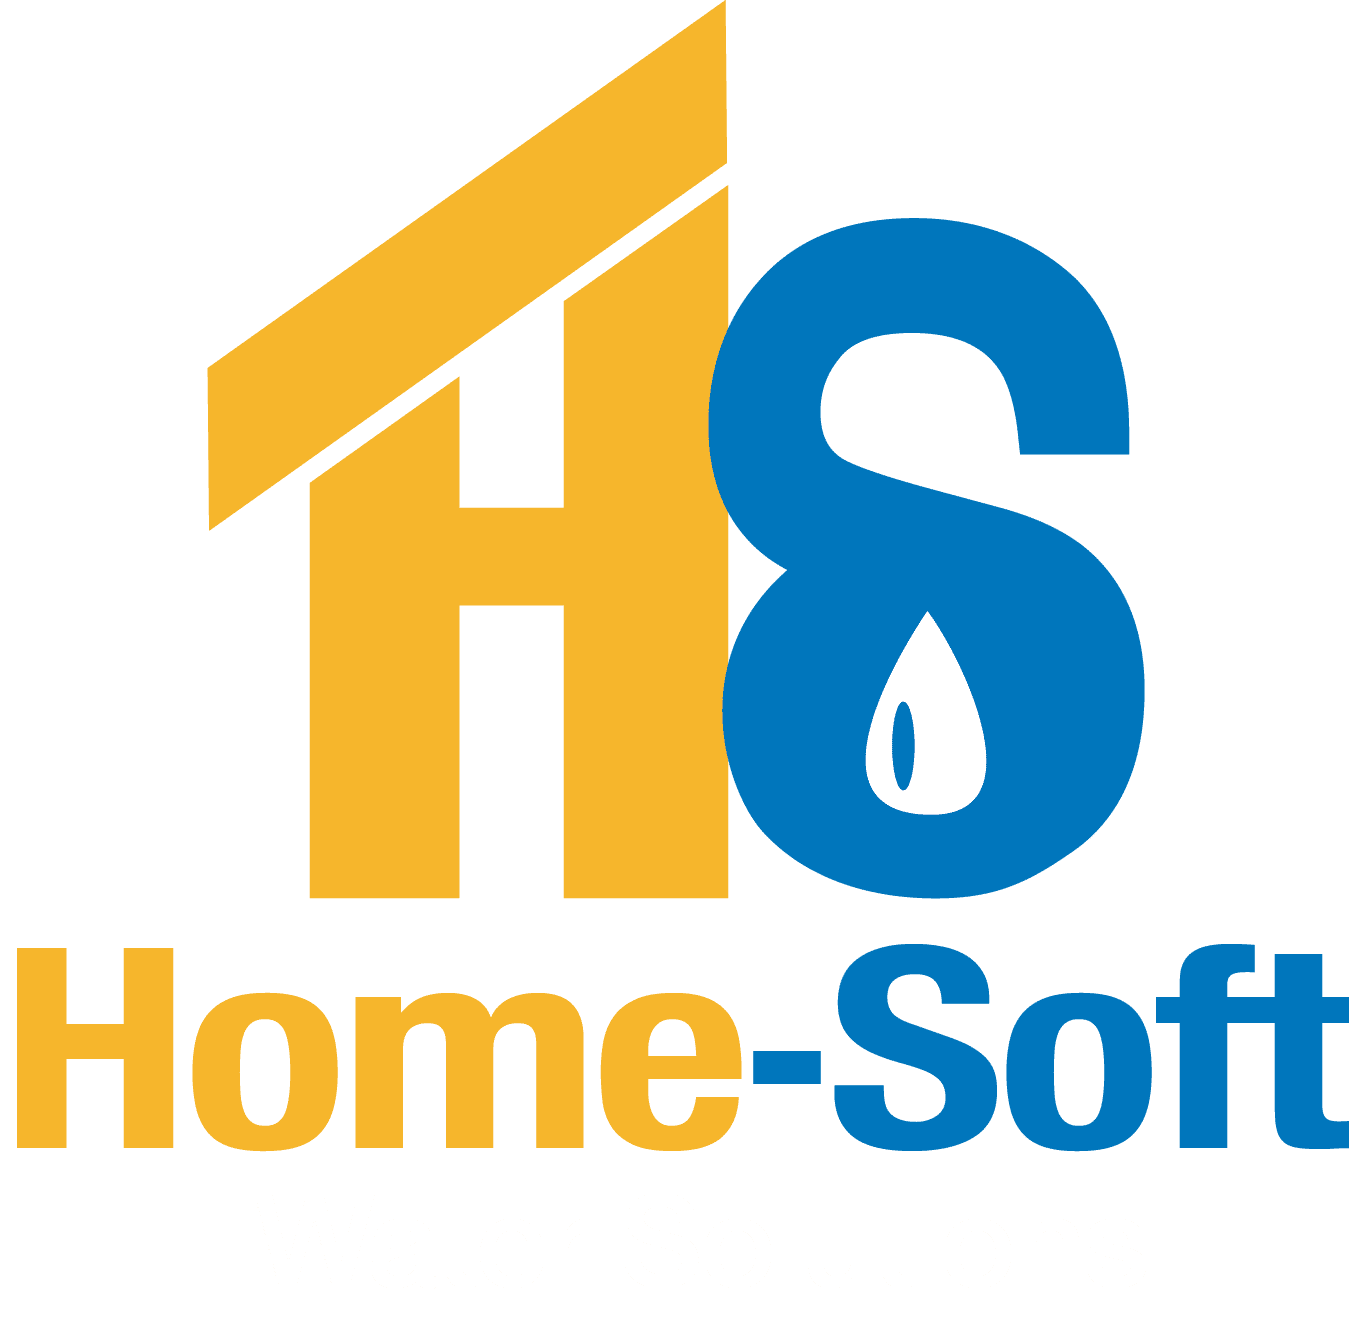 Home-Soft Water Solutions